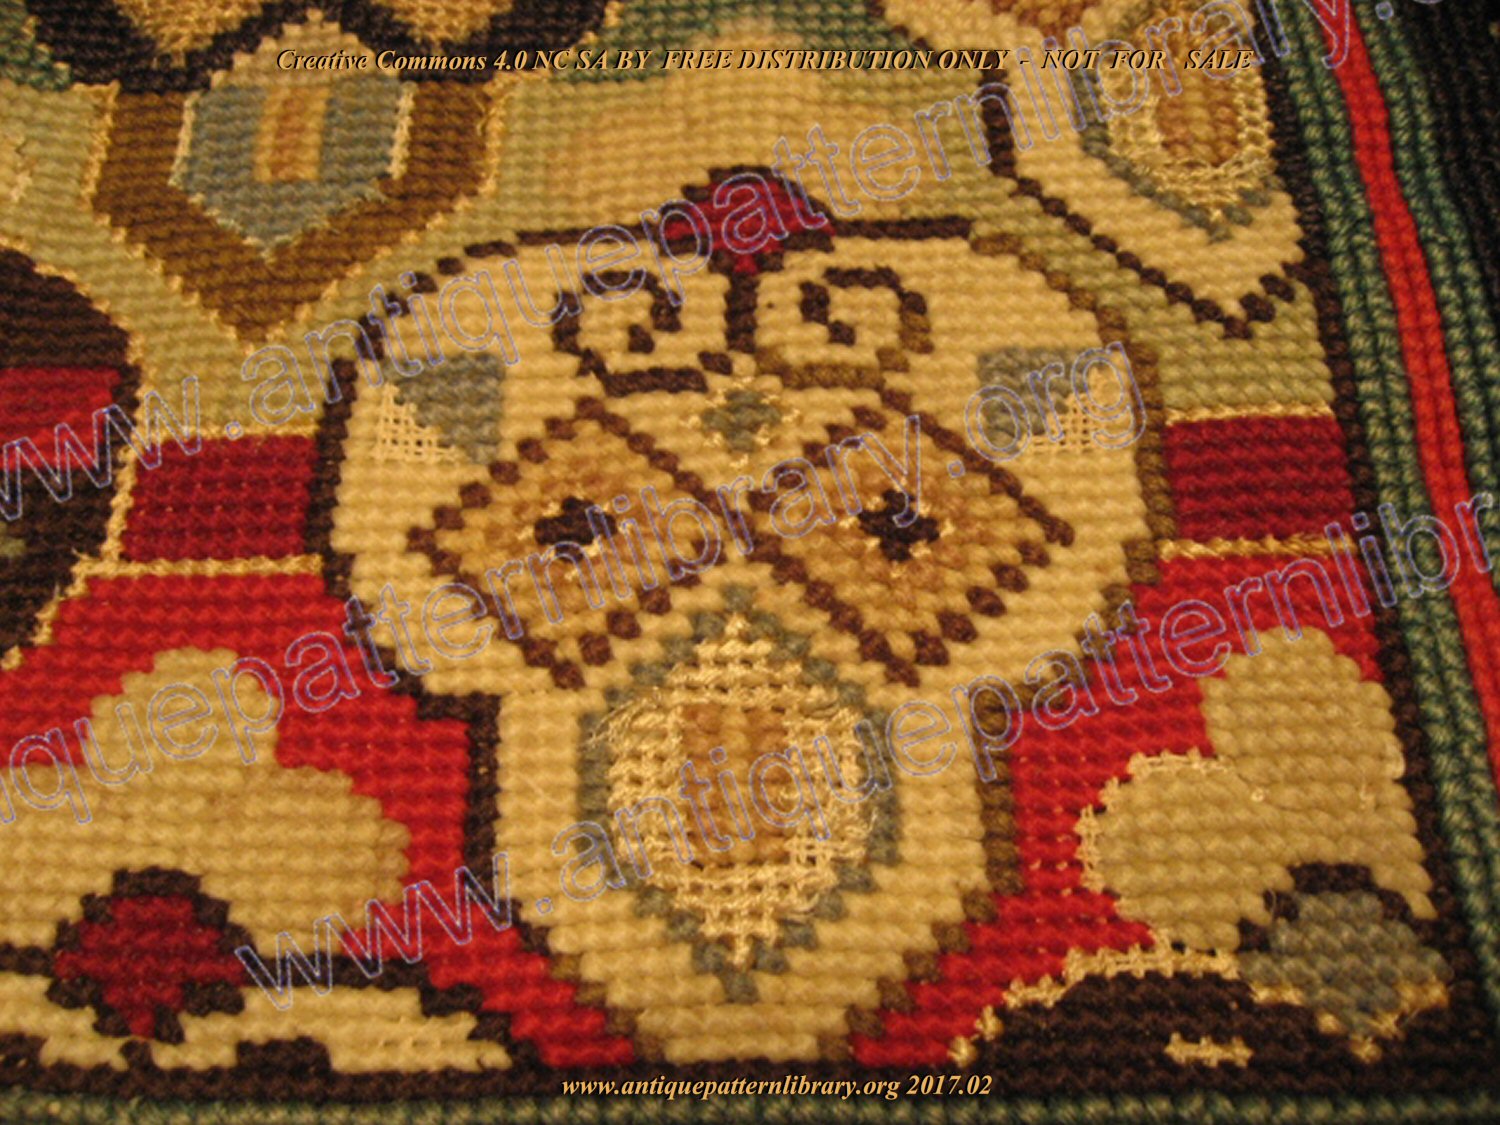 H-AW001 Antique needlepoint cushion cover front